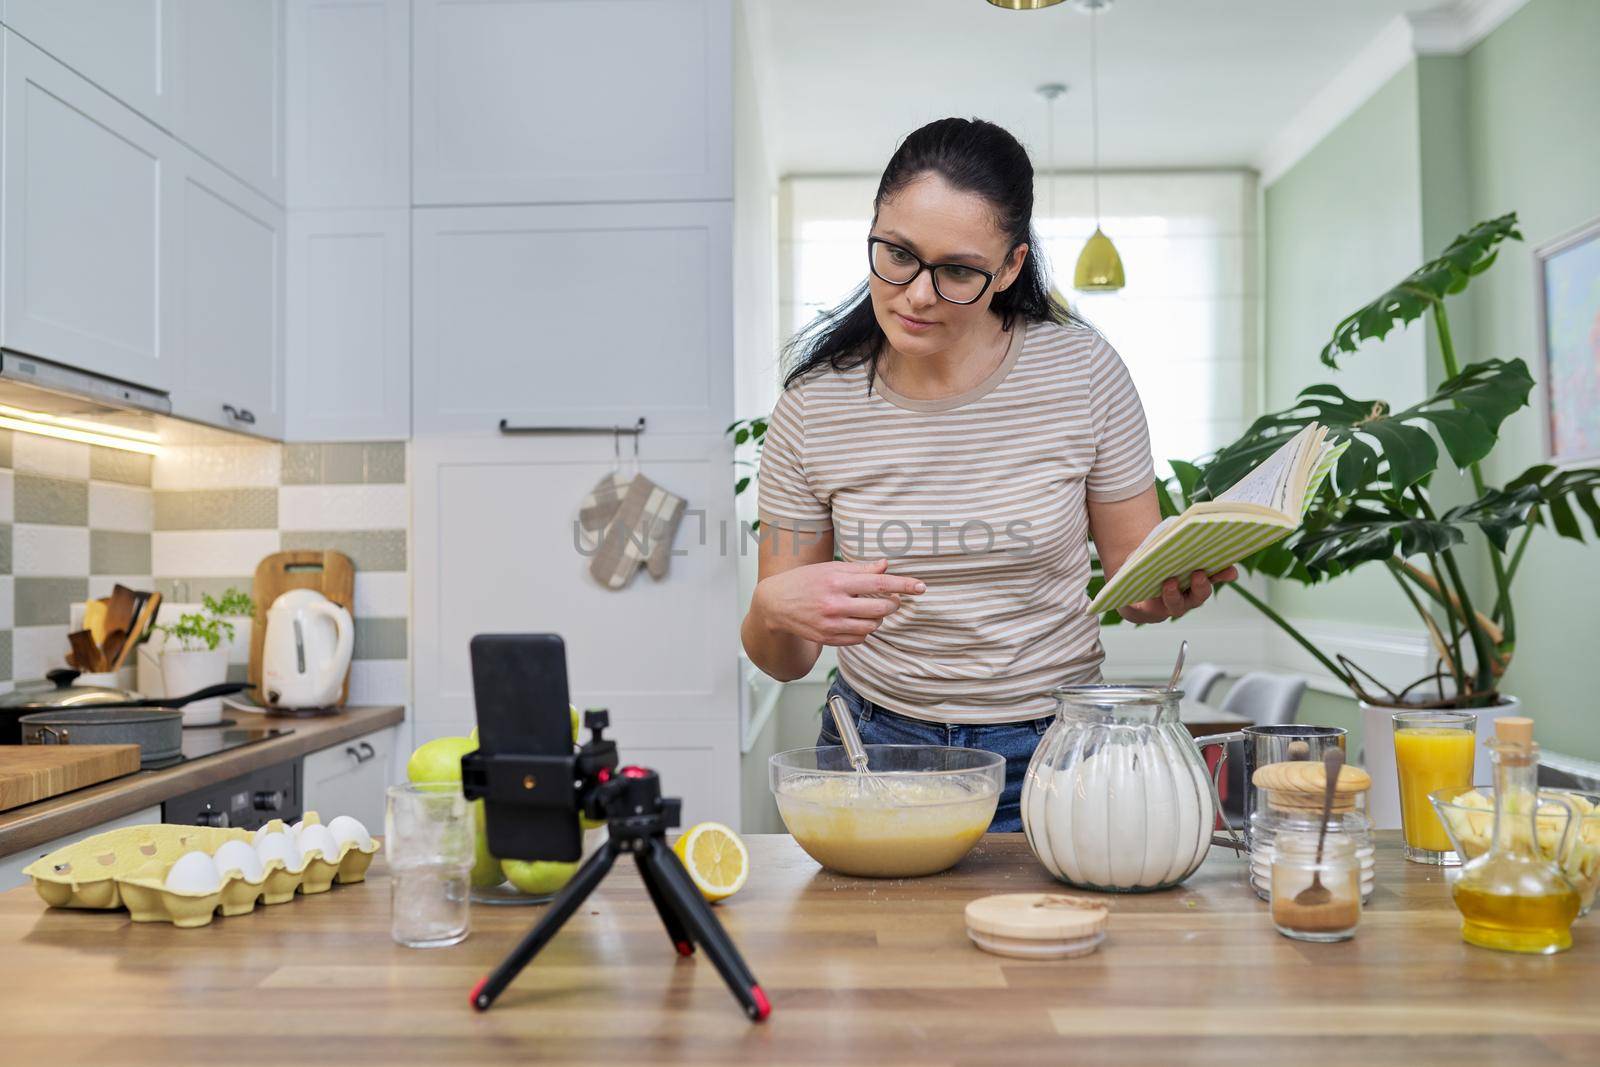 Woman preparing apple pie at home in kitchen with recipe book in her hand, looking in smartphone webcam, talking online using video call. Female food blogger recording video recipe